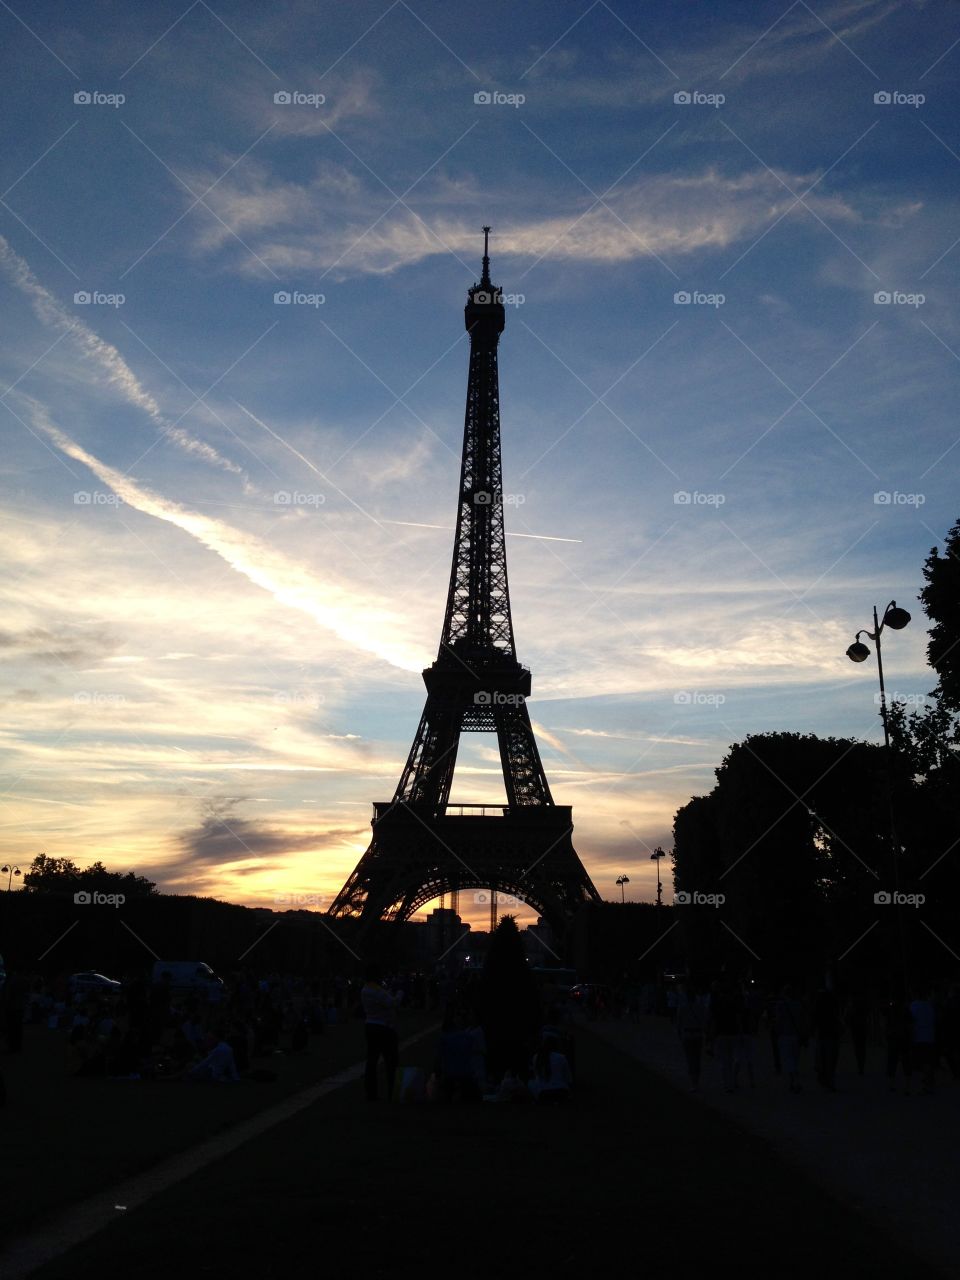 Eiffel Tower silhouette . Eiffel Tower silhouette during sunset